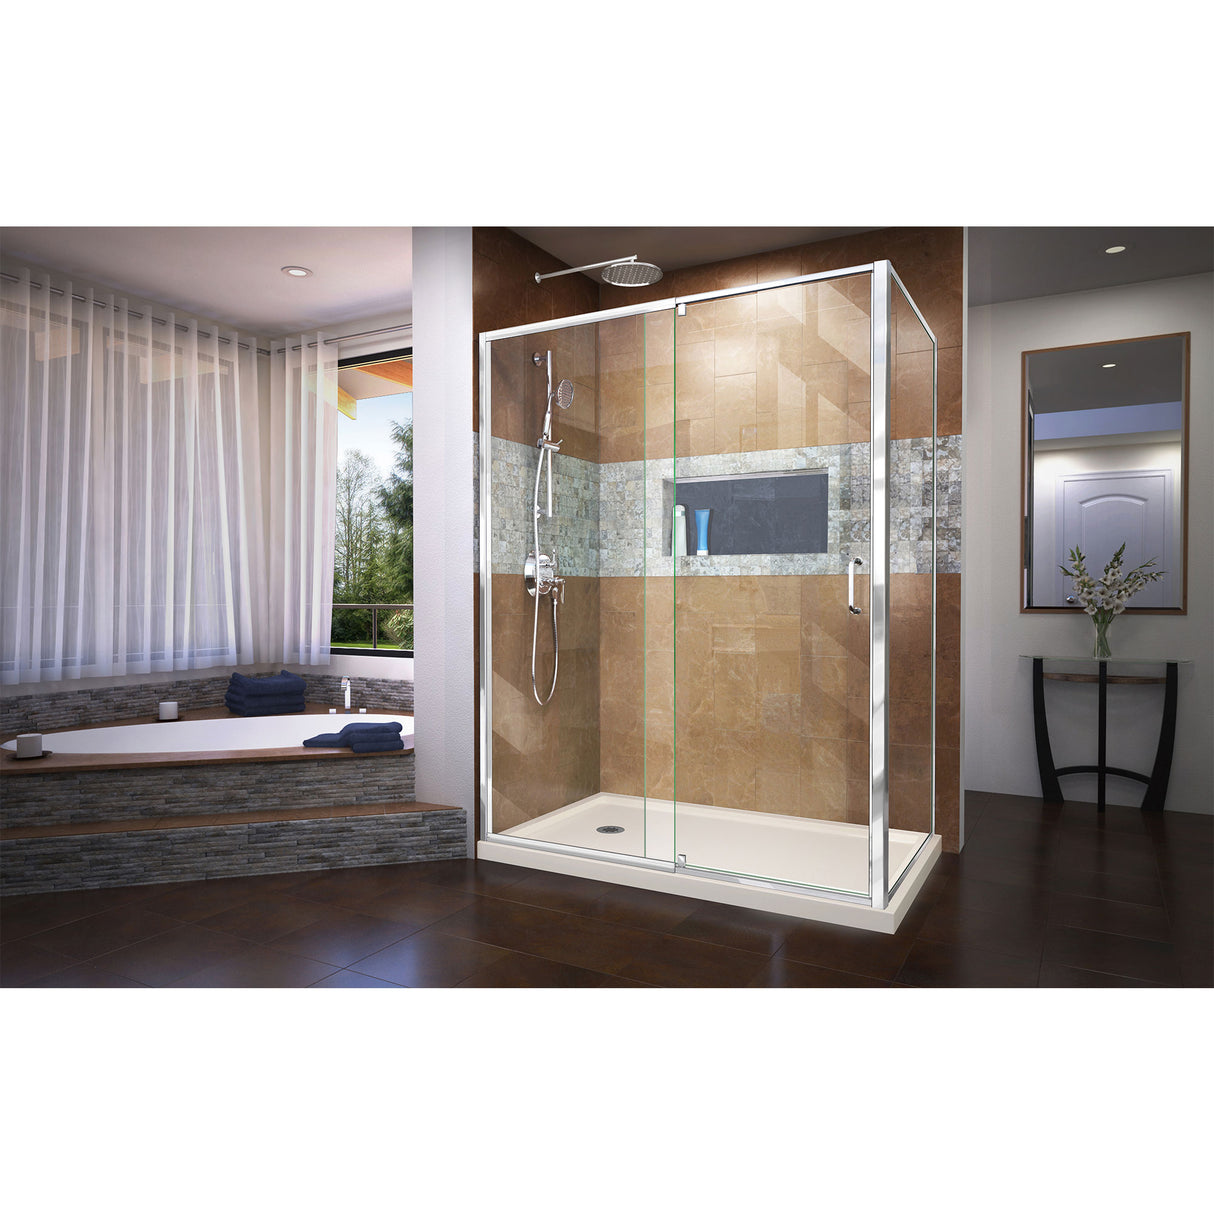 DreamLine Flex 36 in. D x 60 in. W x 74 3/4 in. H Semi-Frameless Pivot Shower Enclosure in Chrome with Left Drain Biscuit Base Kit